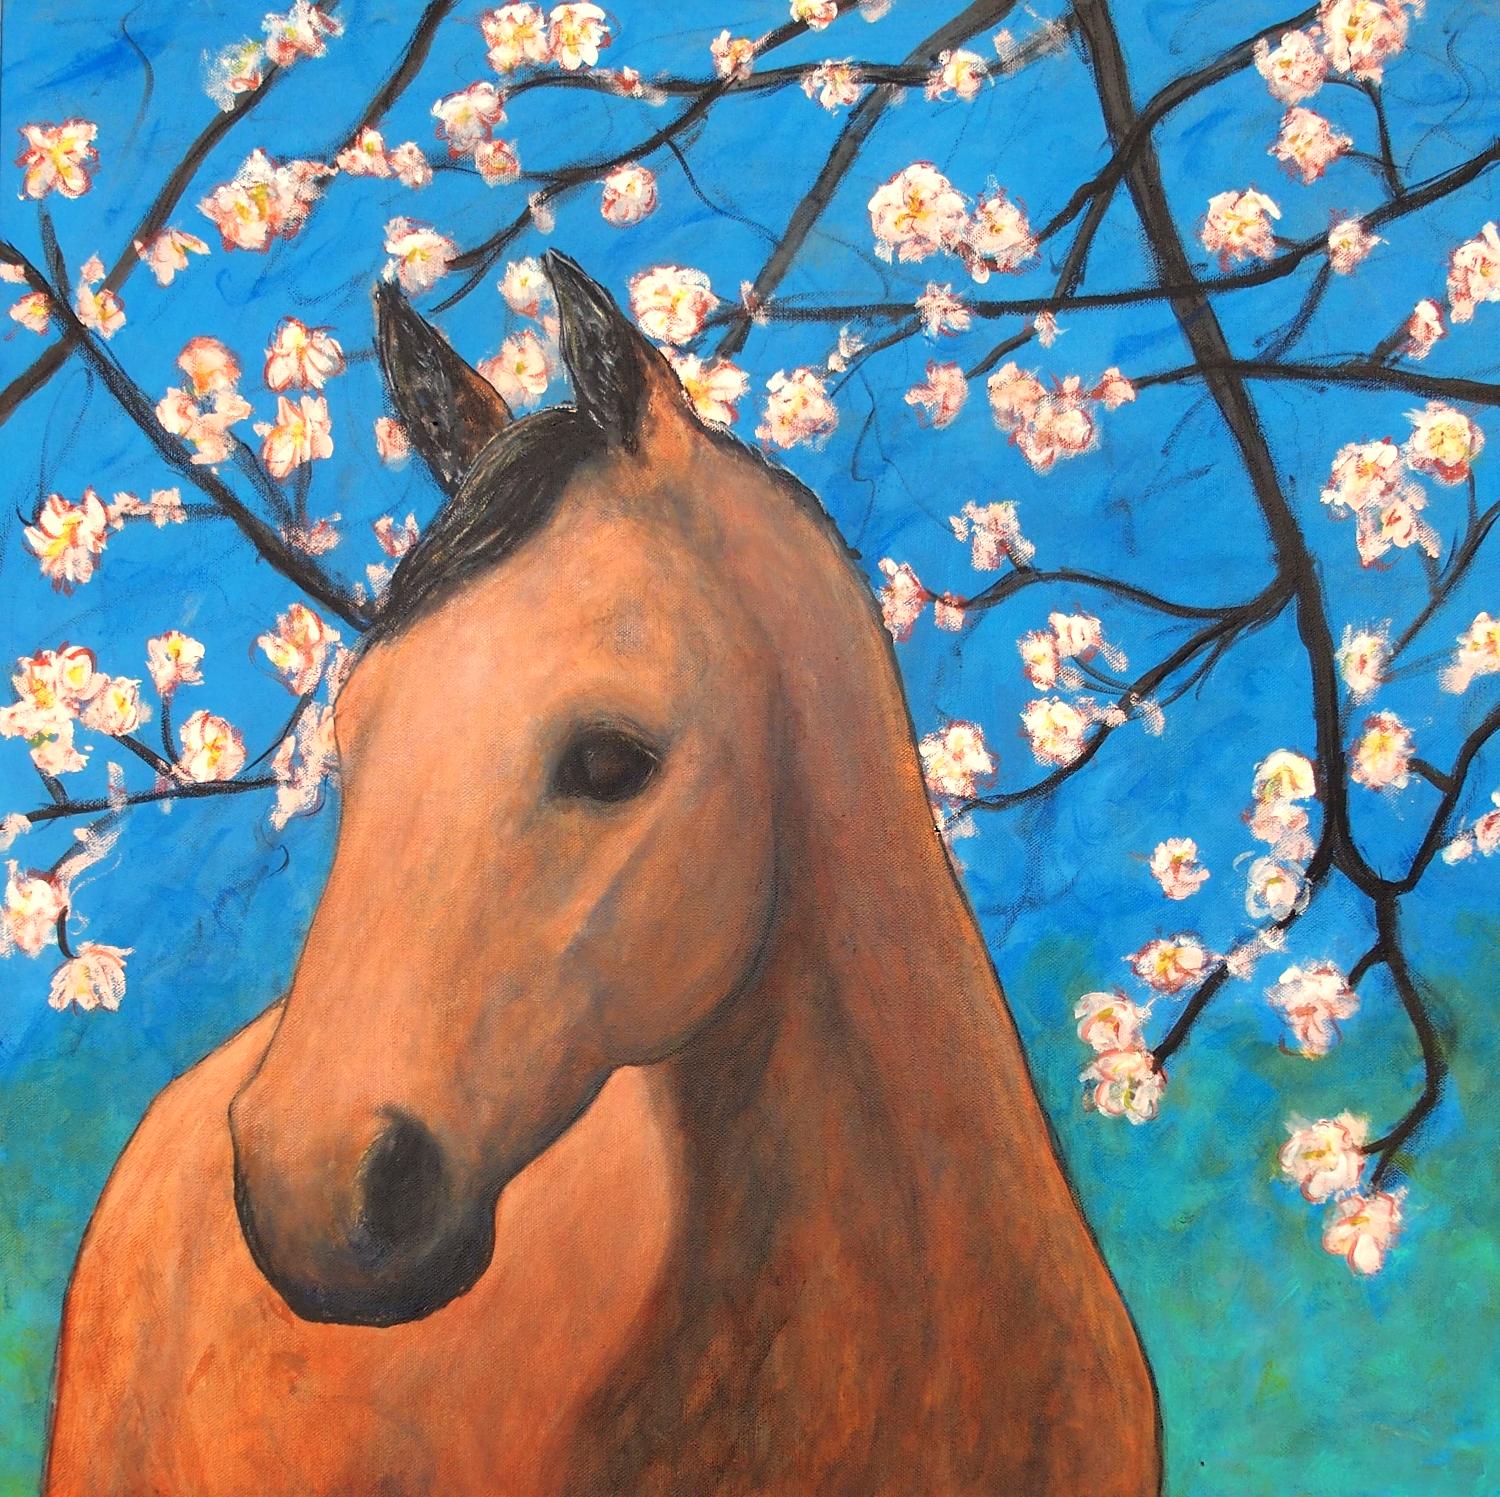 To Be Alive Beneath Cherry Blossoms, Original Painting - Art by Jennifer Ross